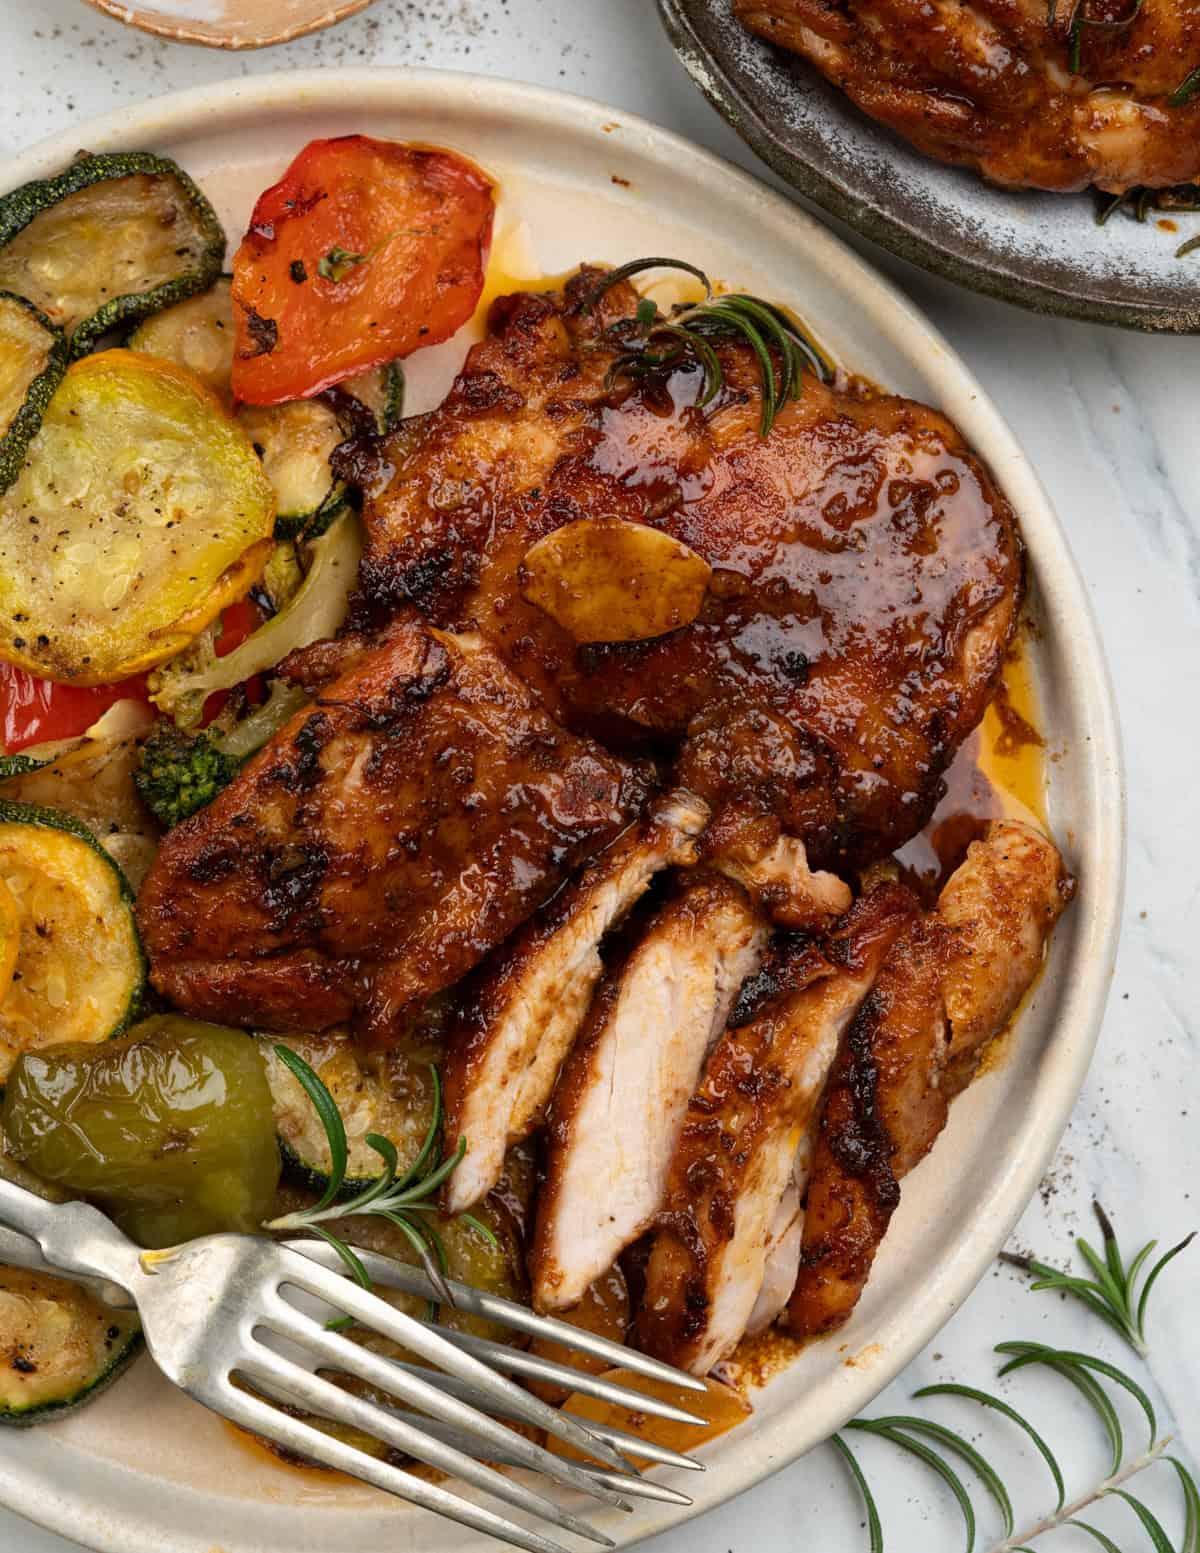 Serve these skillet chicken thighs with roasted veggies.